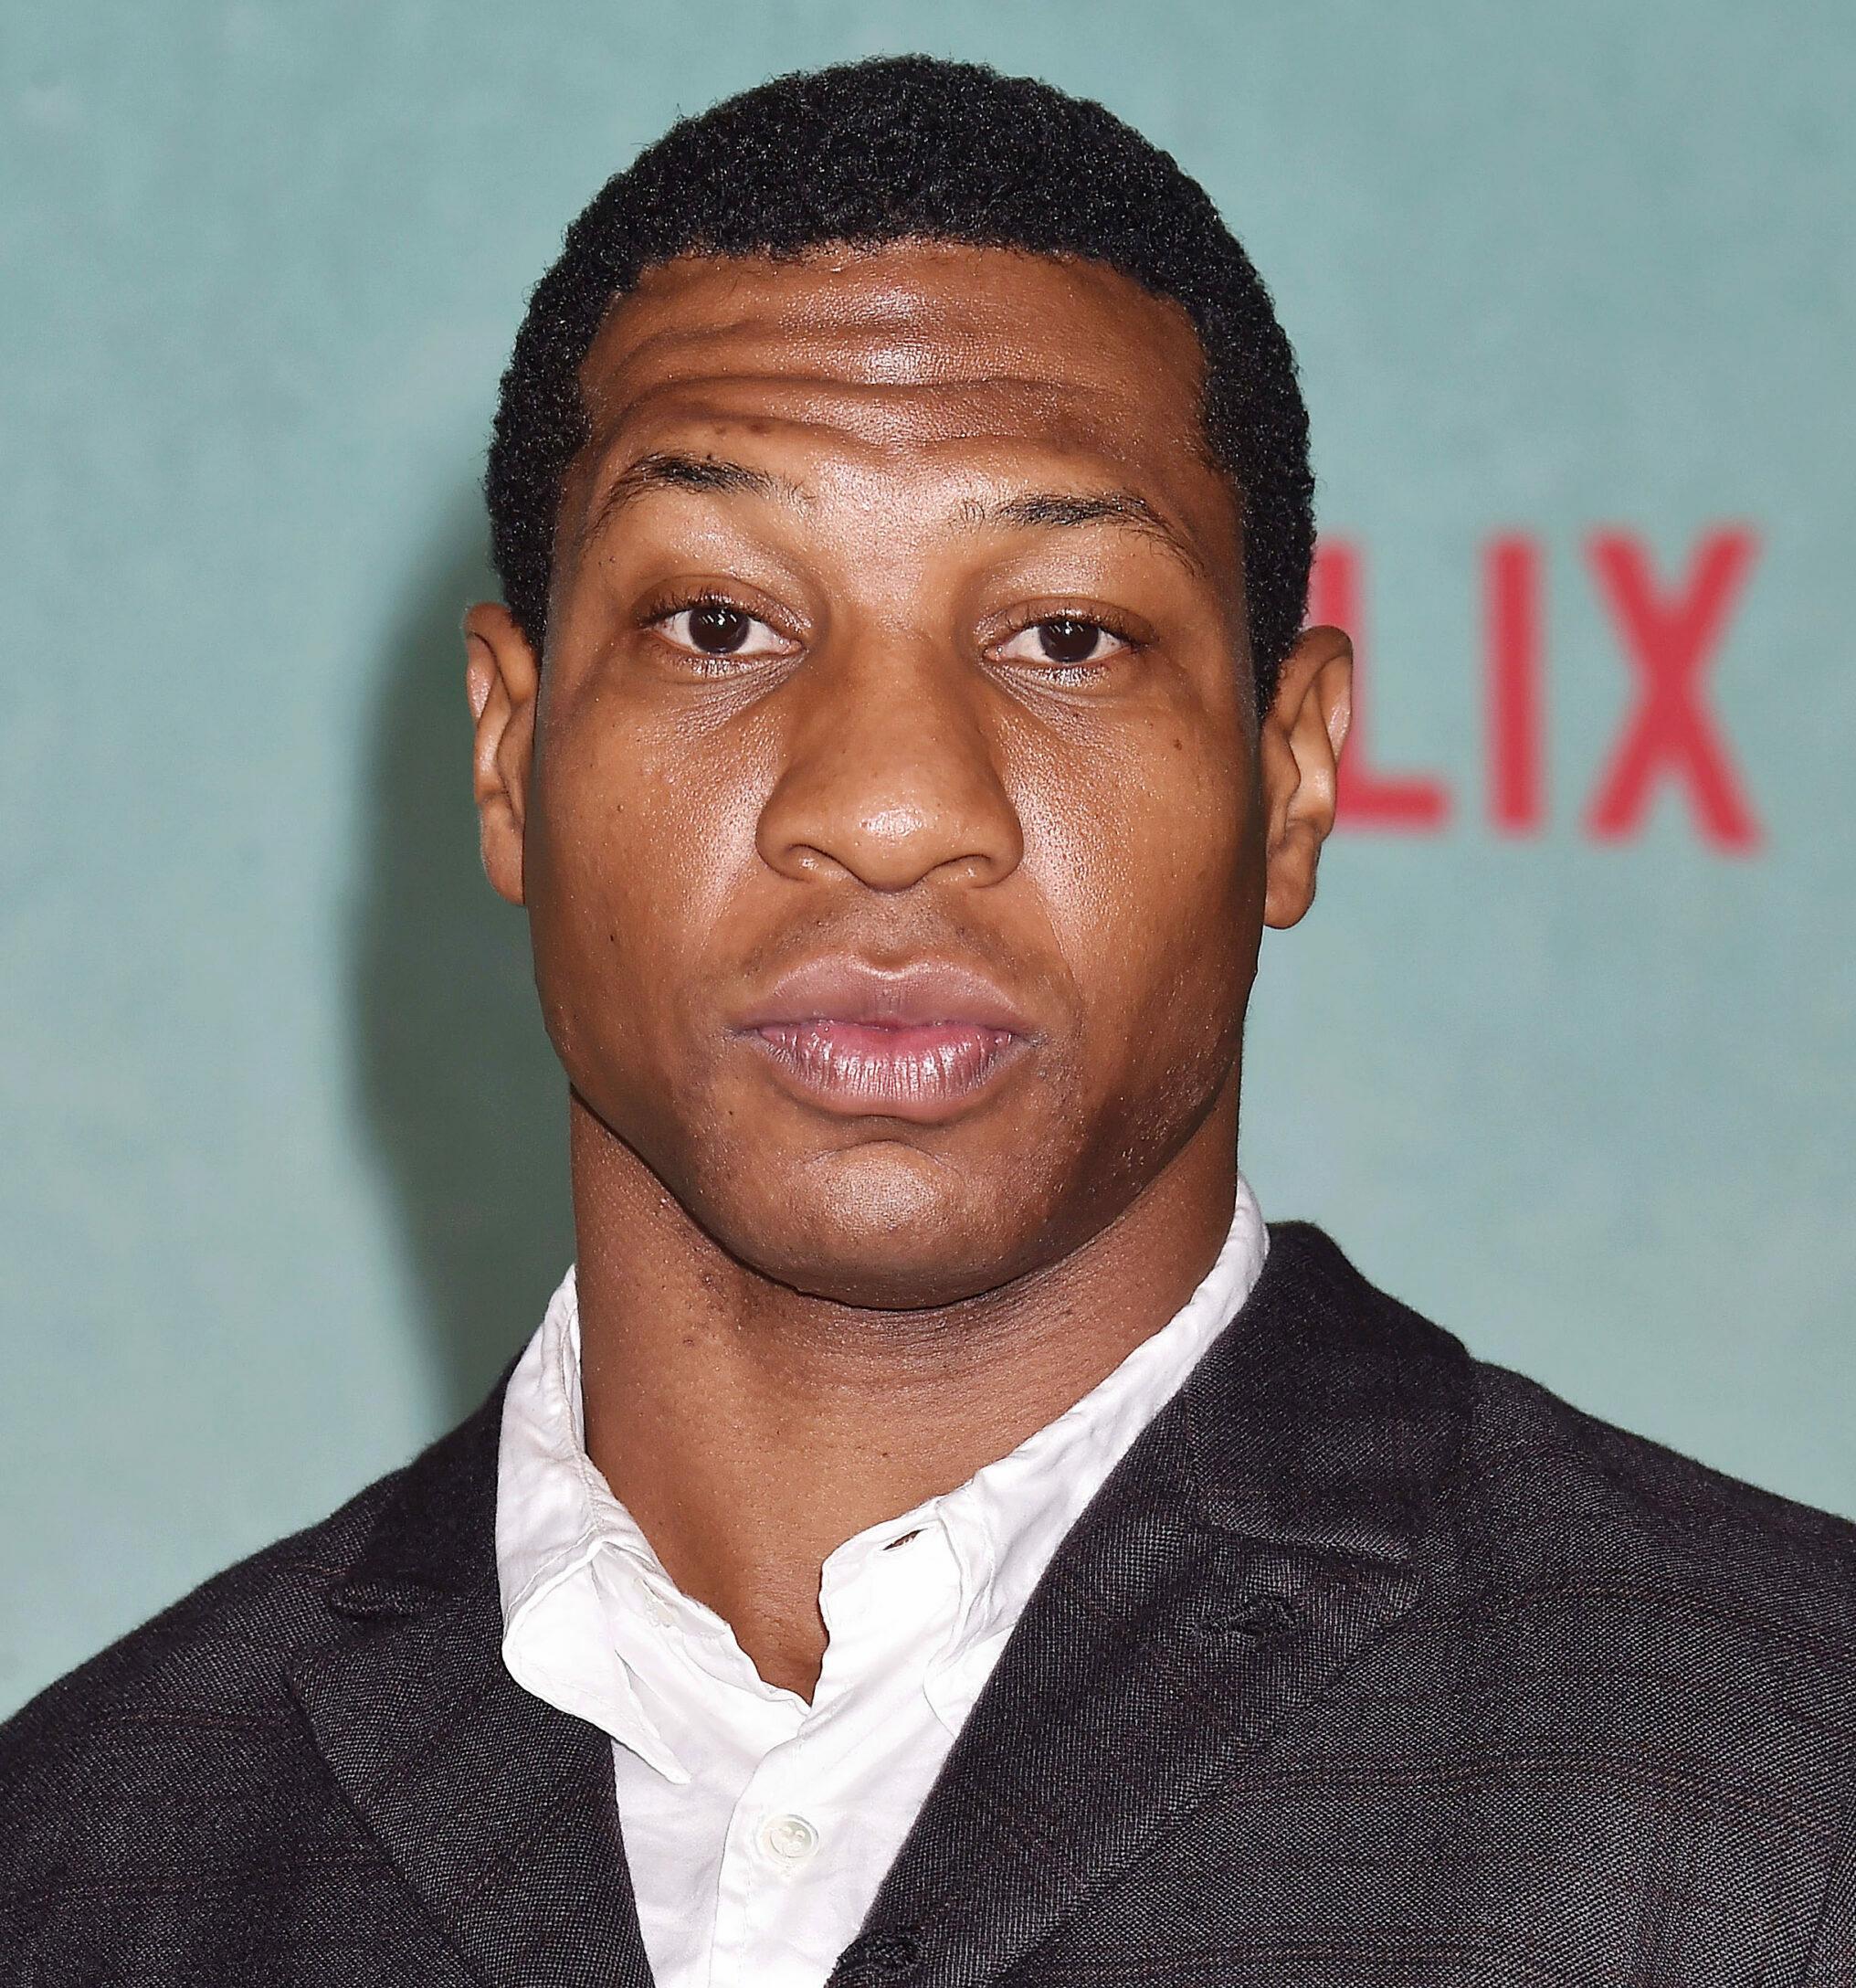 Jonathan Majors At The Los Angeles Premiere Of 'The Harder They Fall'